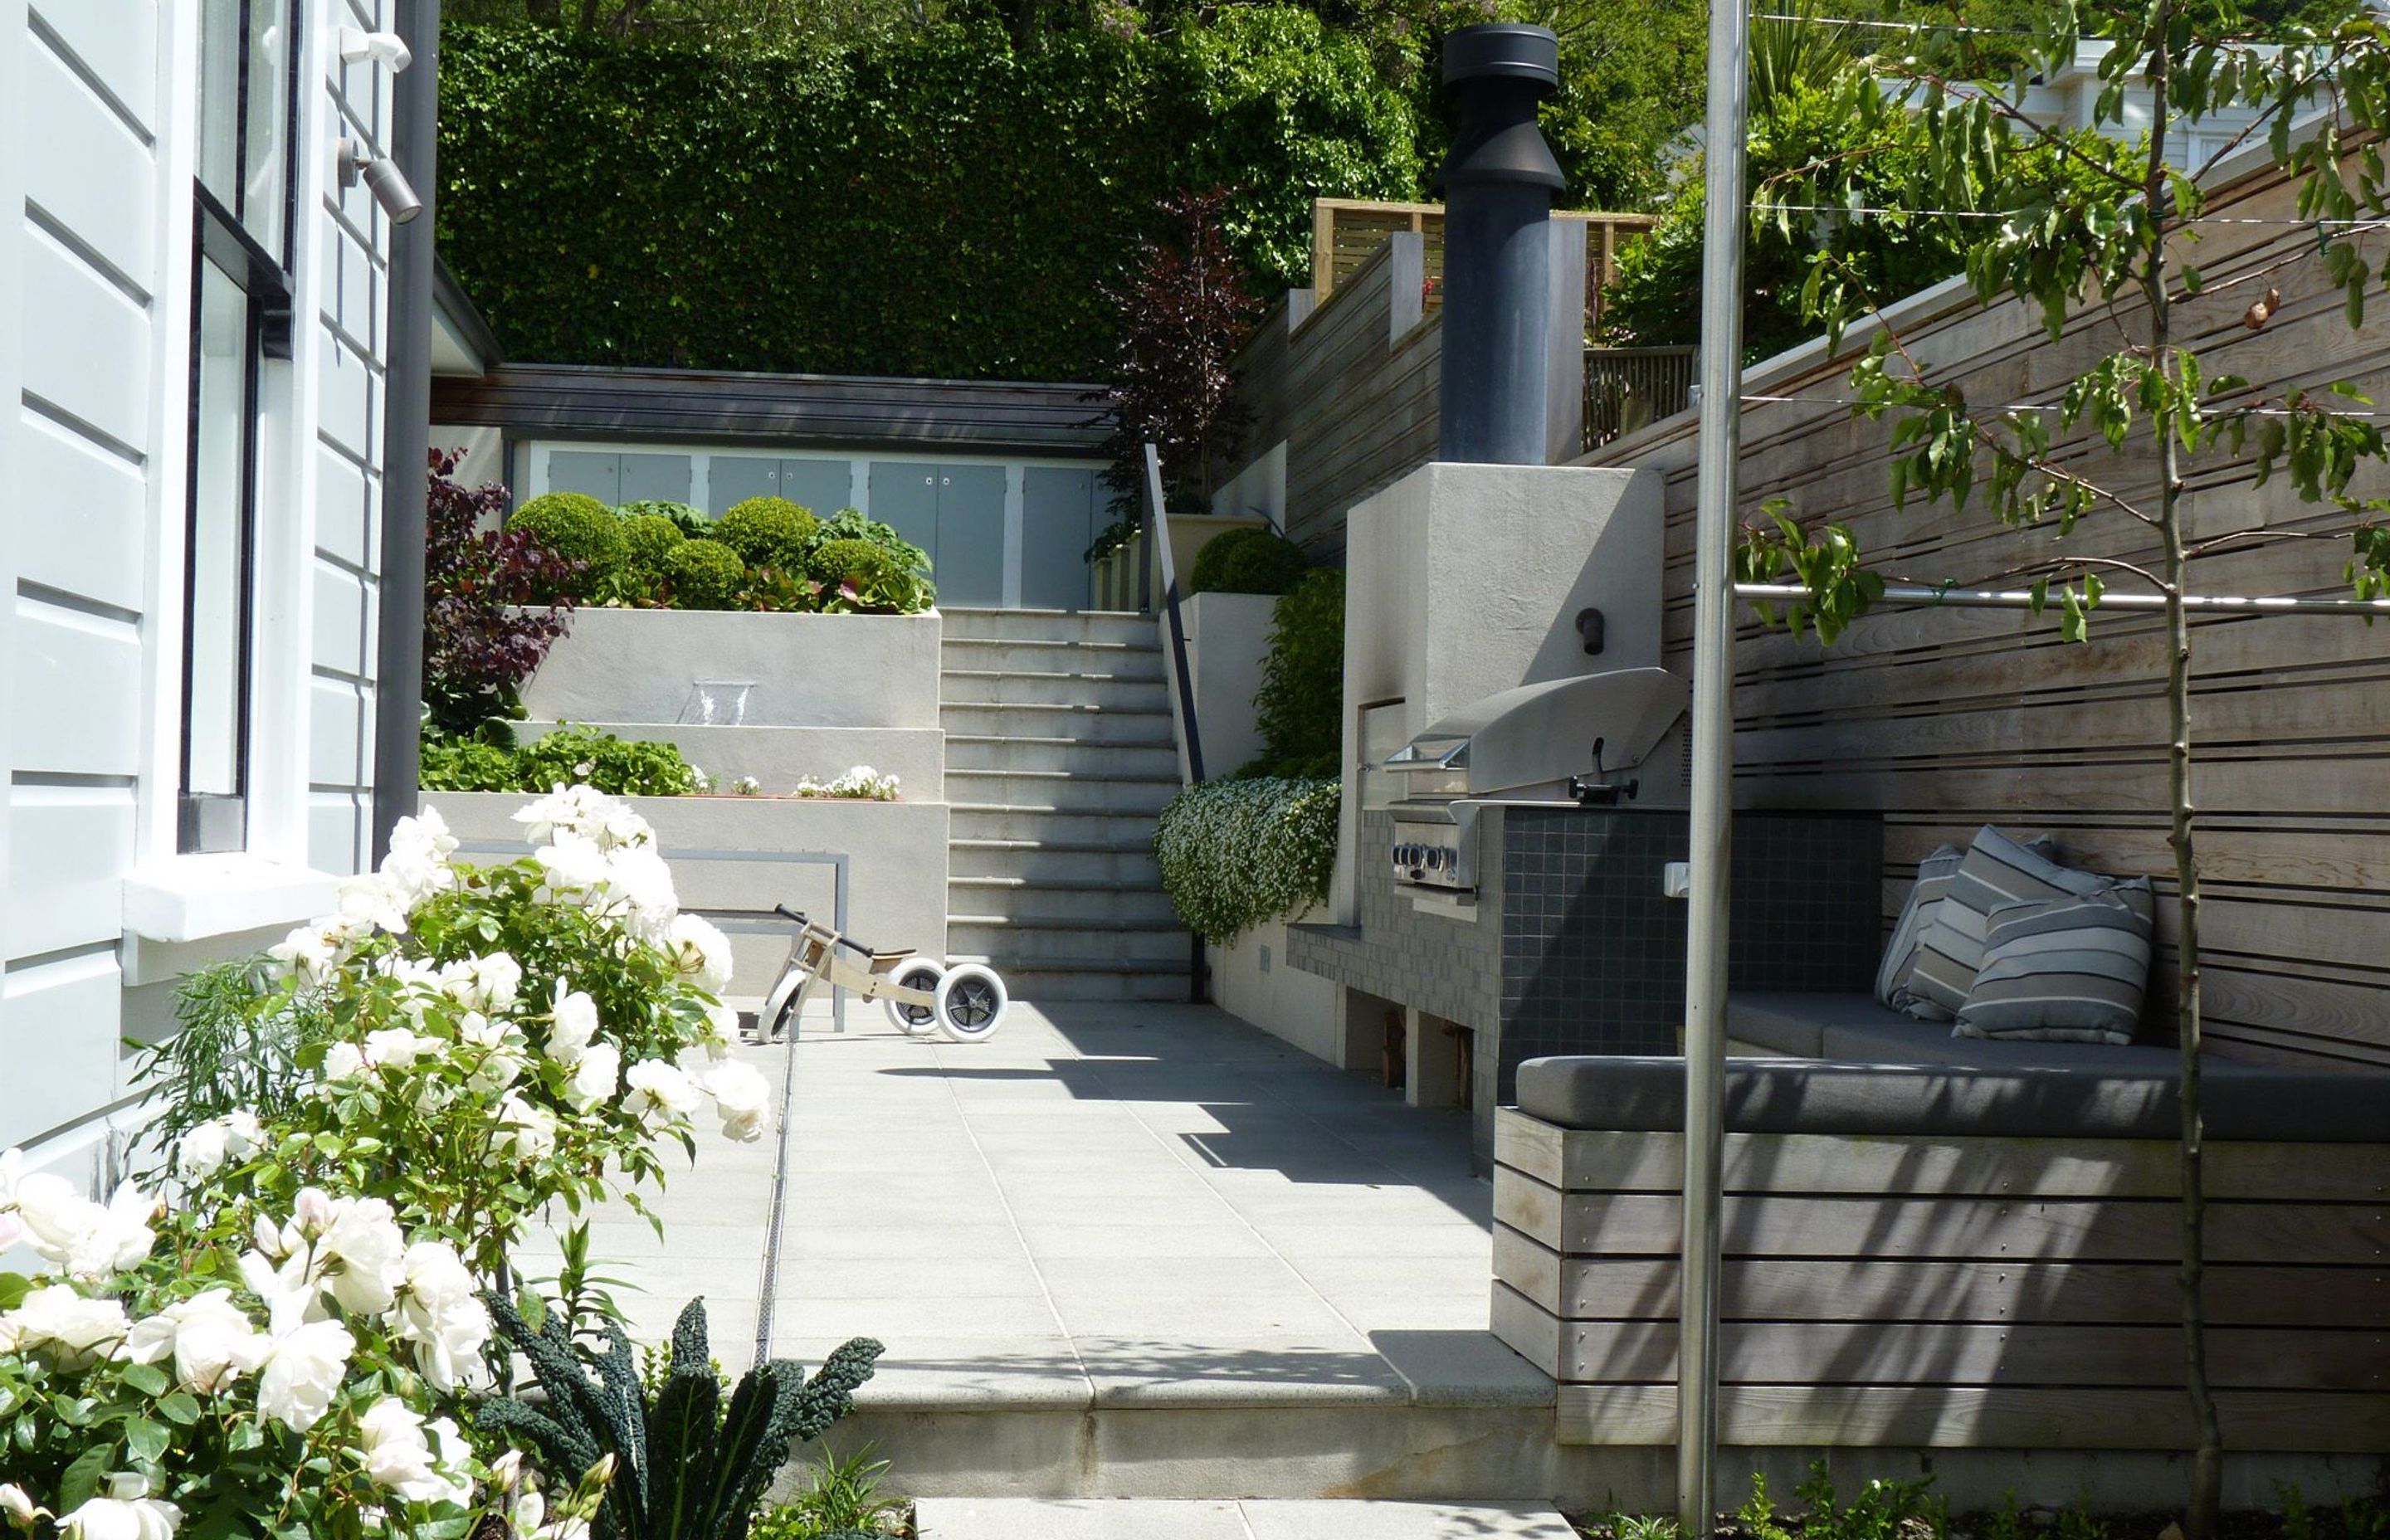 Sunny sheltered private back garden. Architecture &amp; associated landscape architecture by Tse : Wallace Architects.